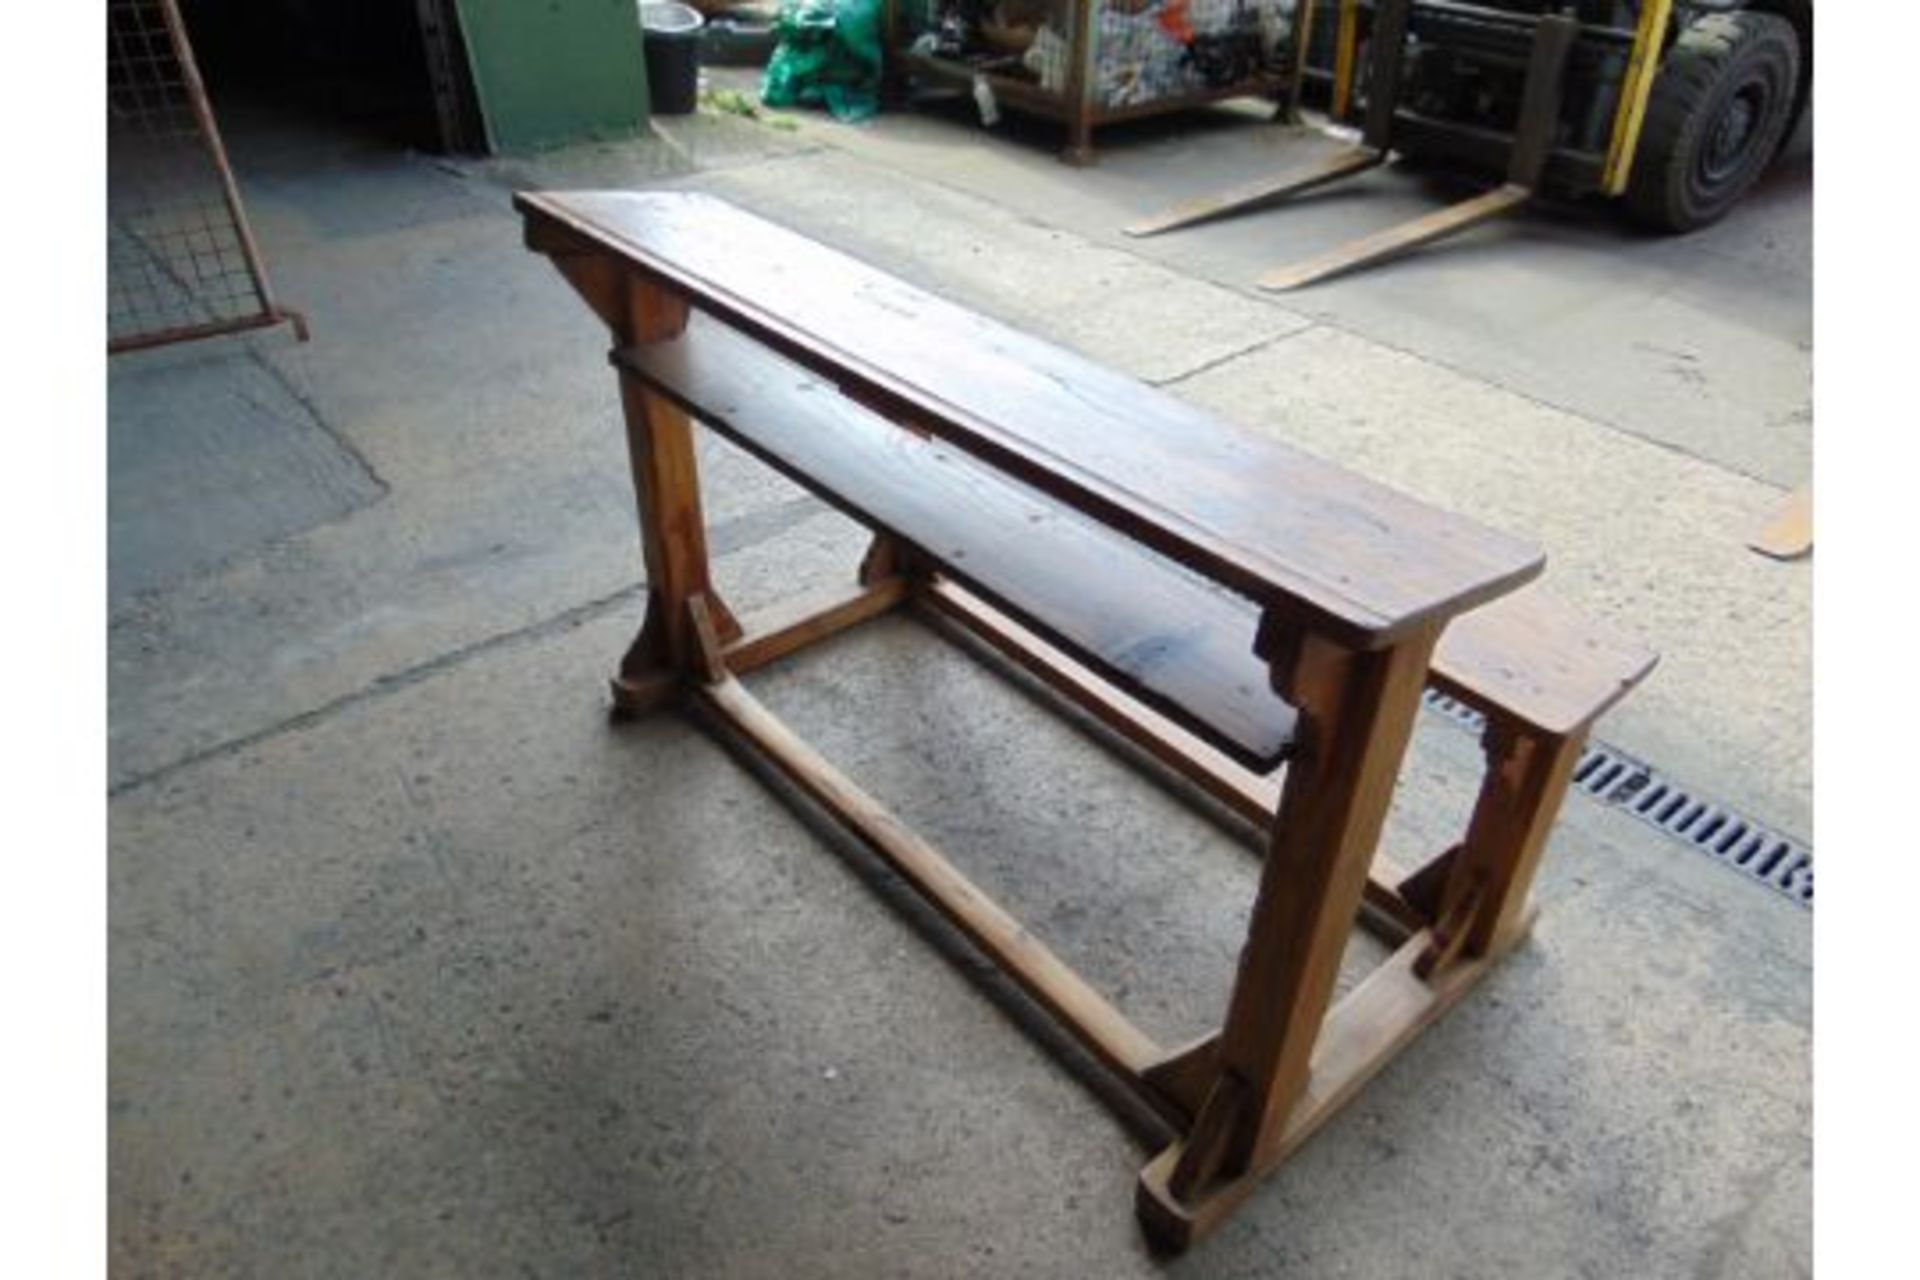 Antique Traditional Wooden School Bench Desk - Image 5 of 6